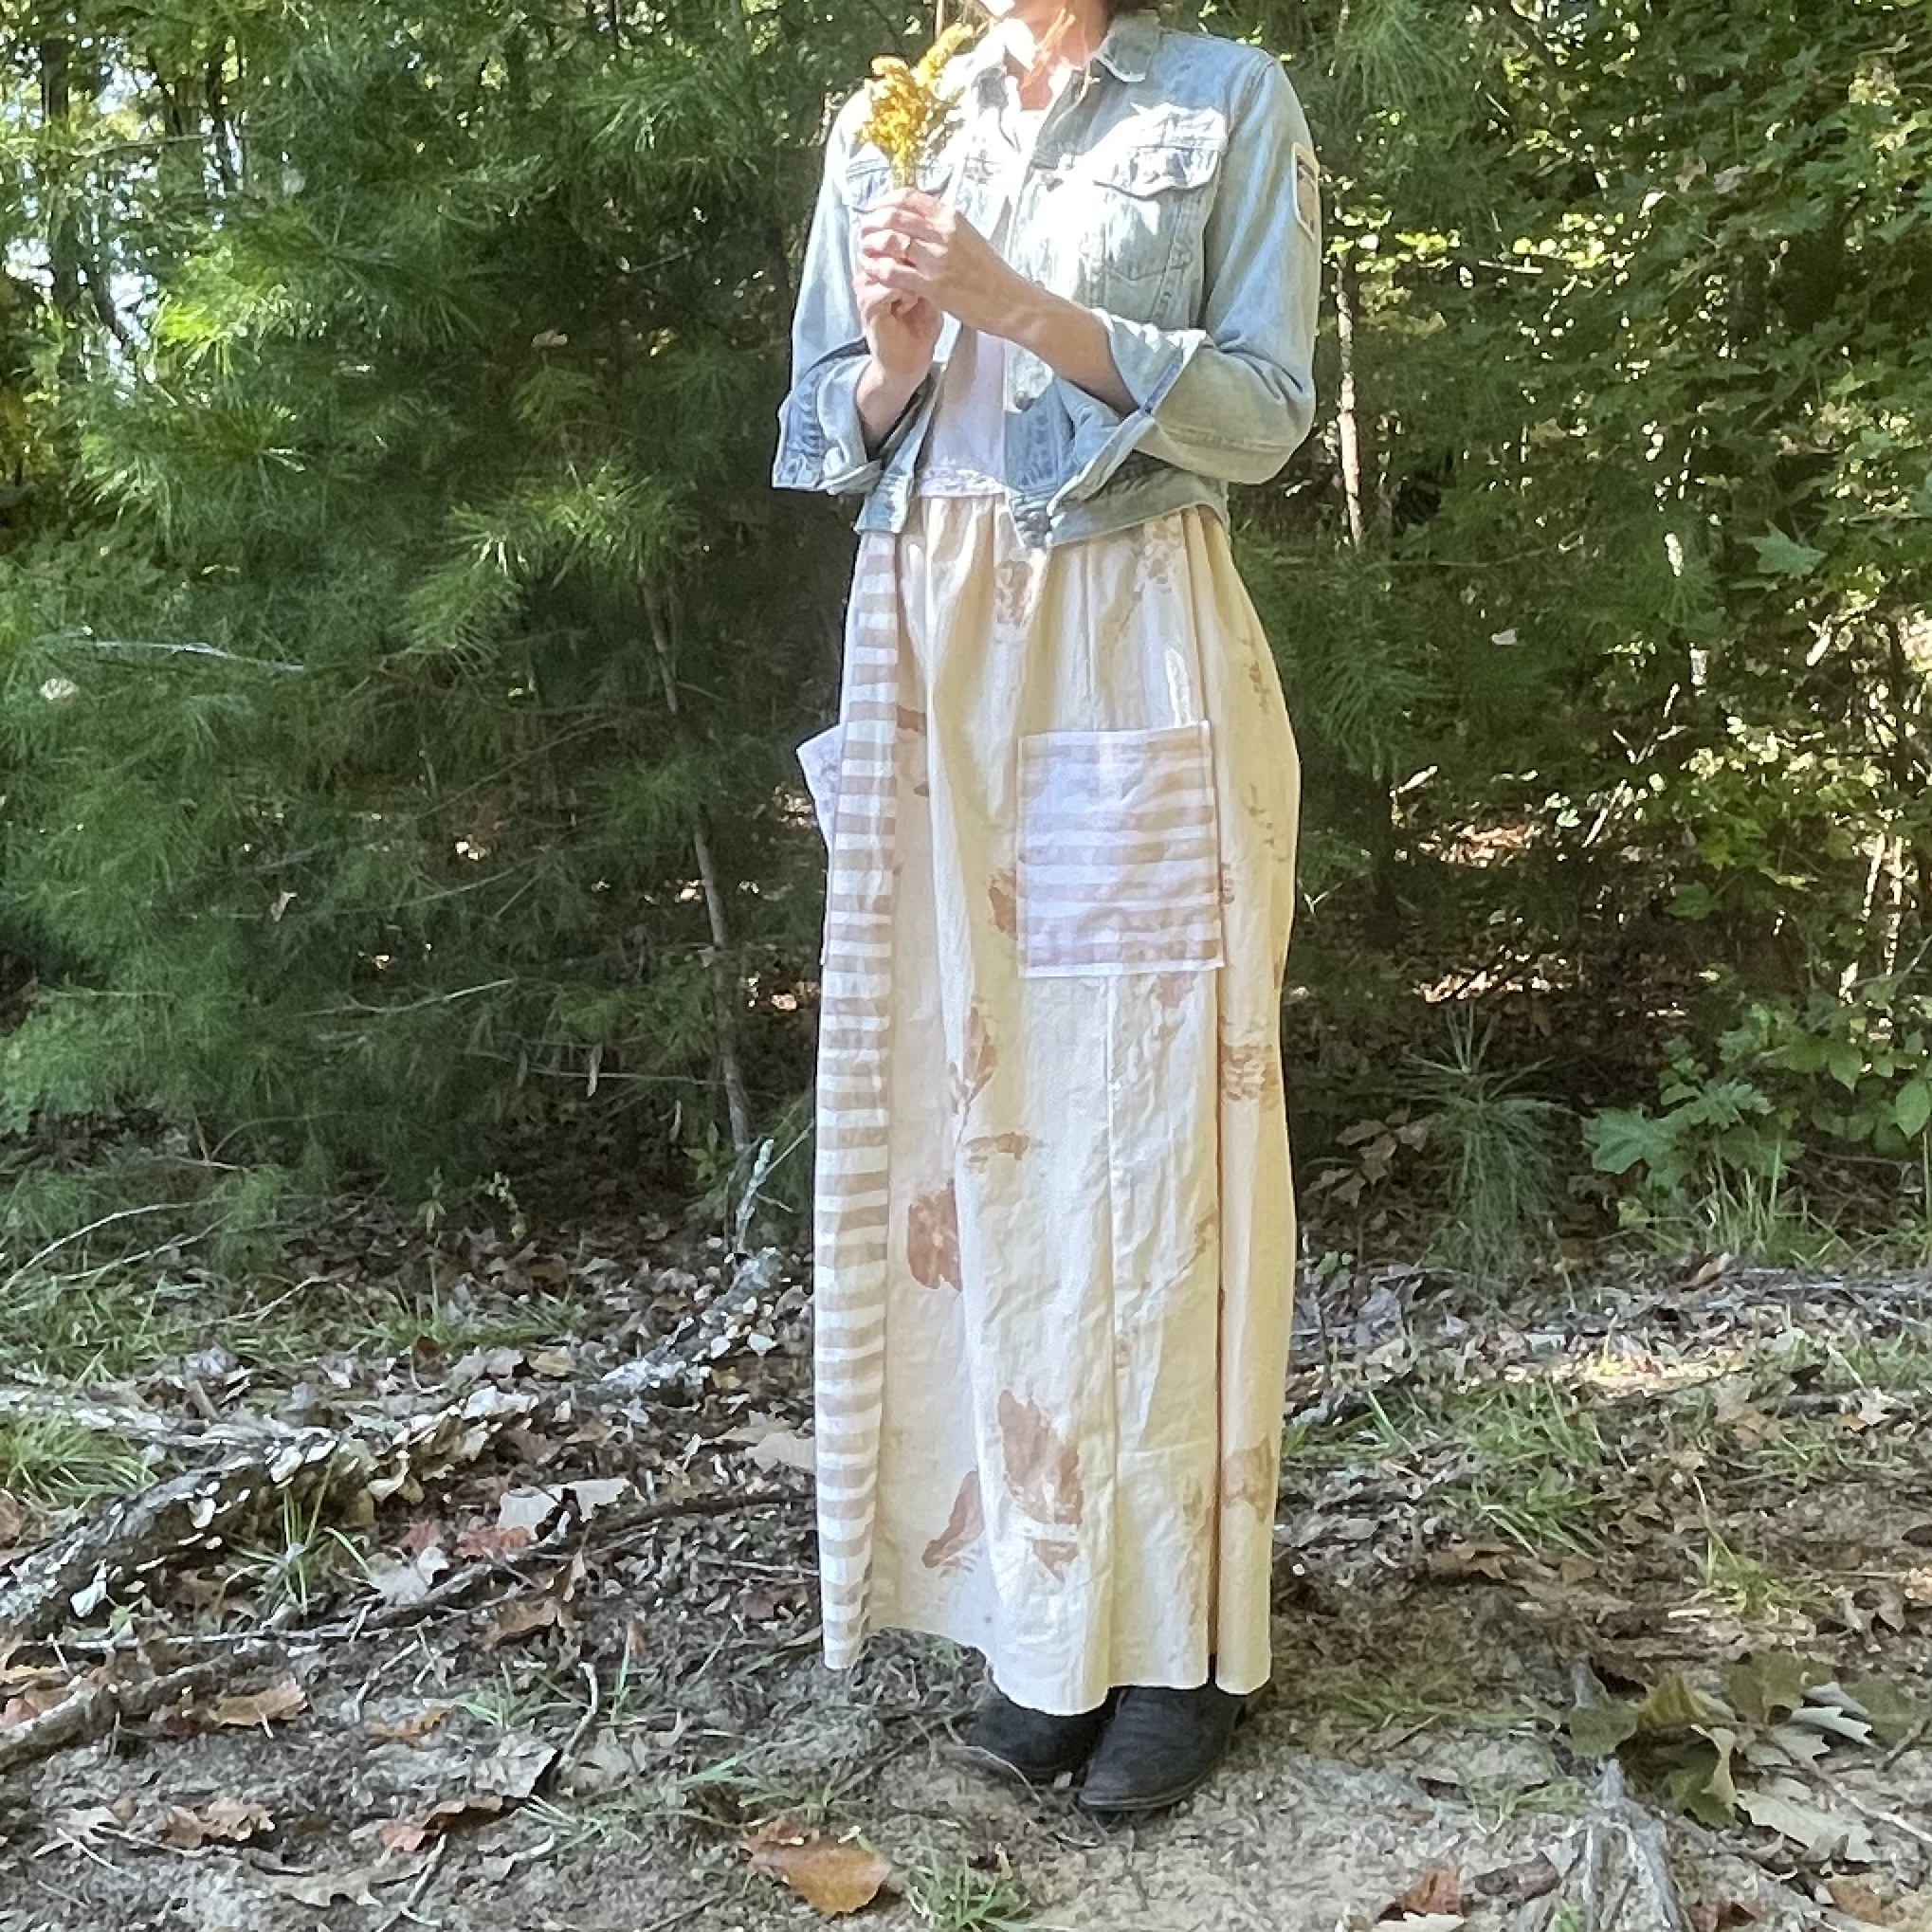 A woman is standing in the woods wearing a long skirt.